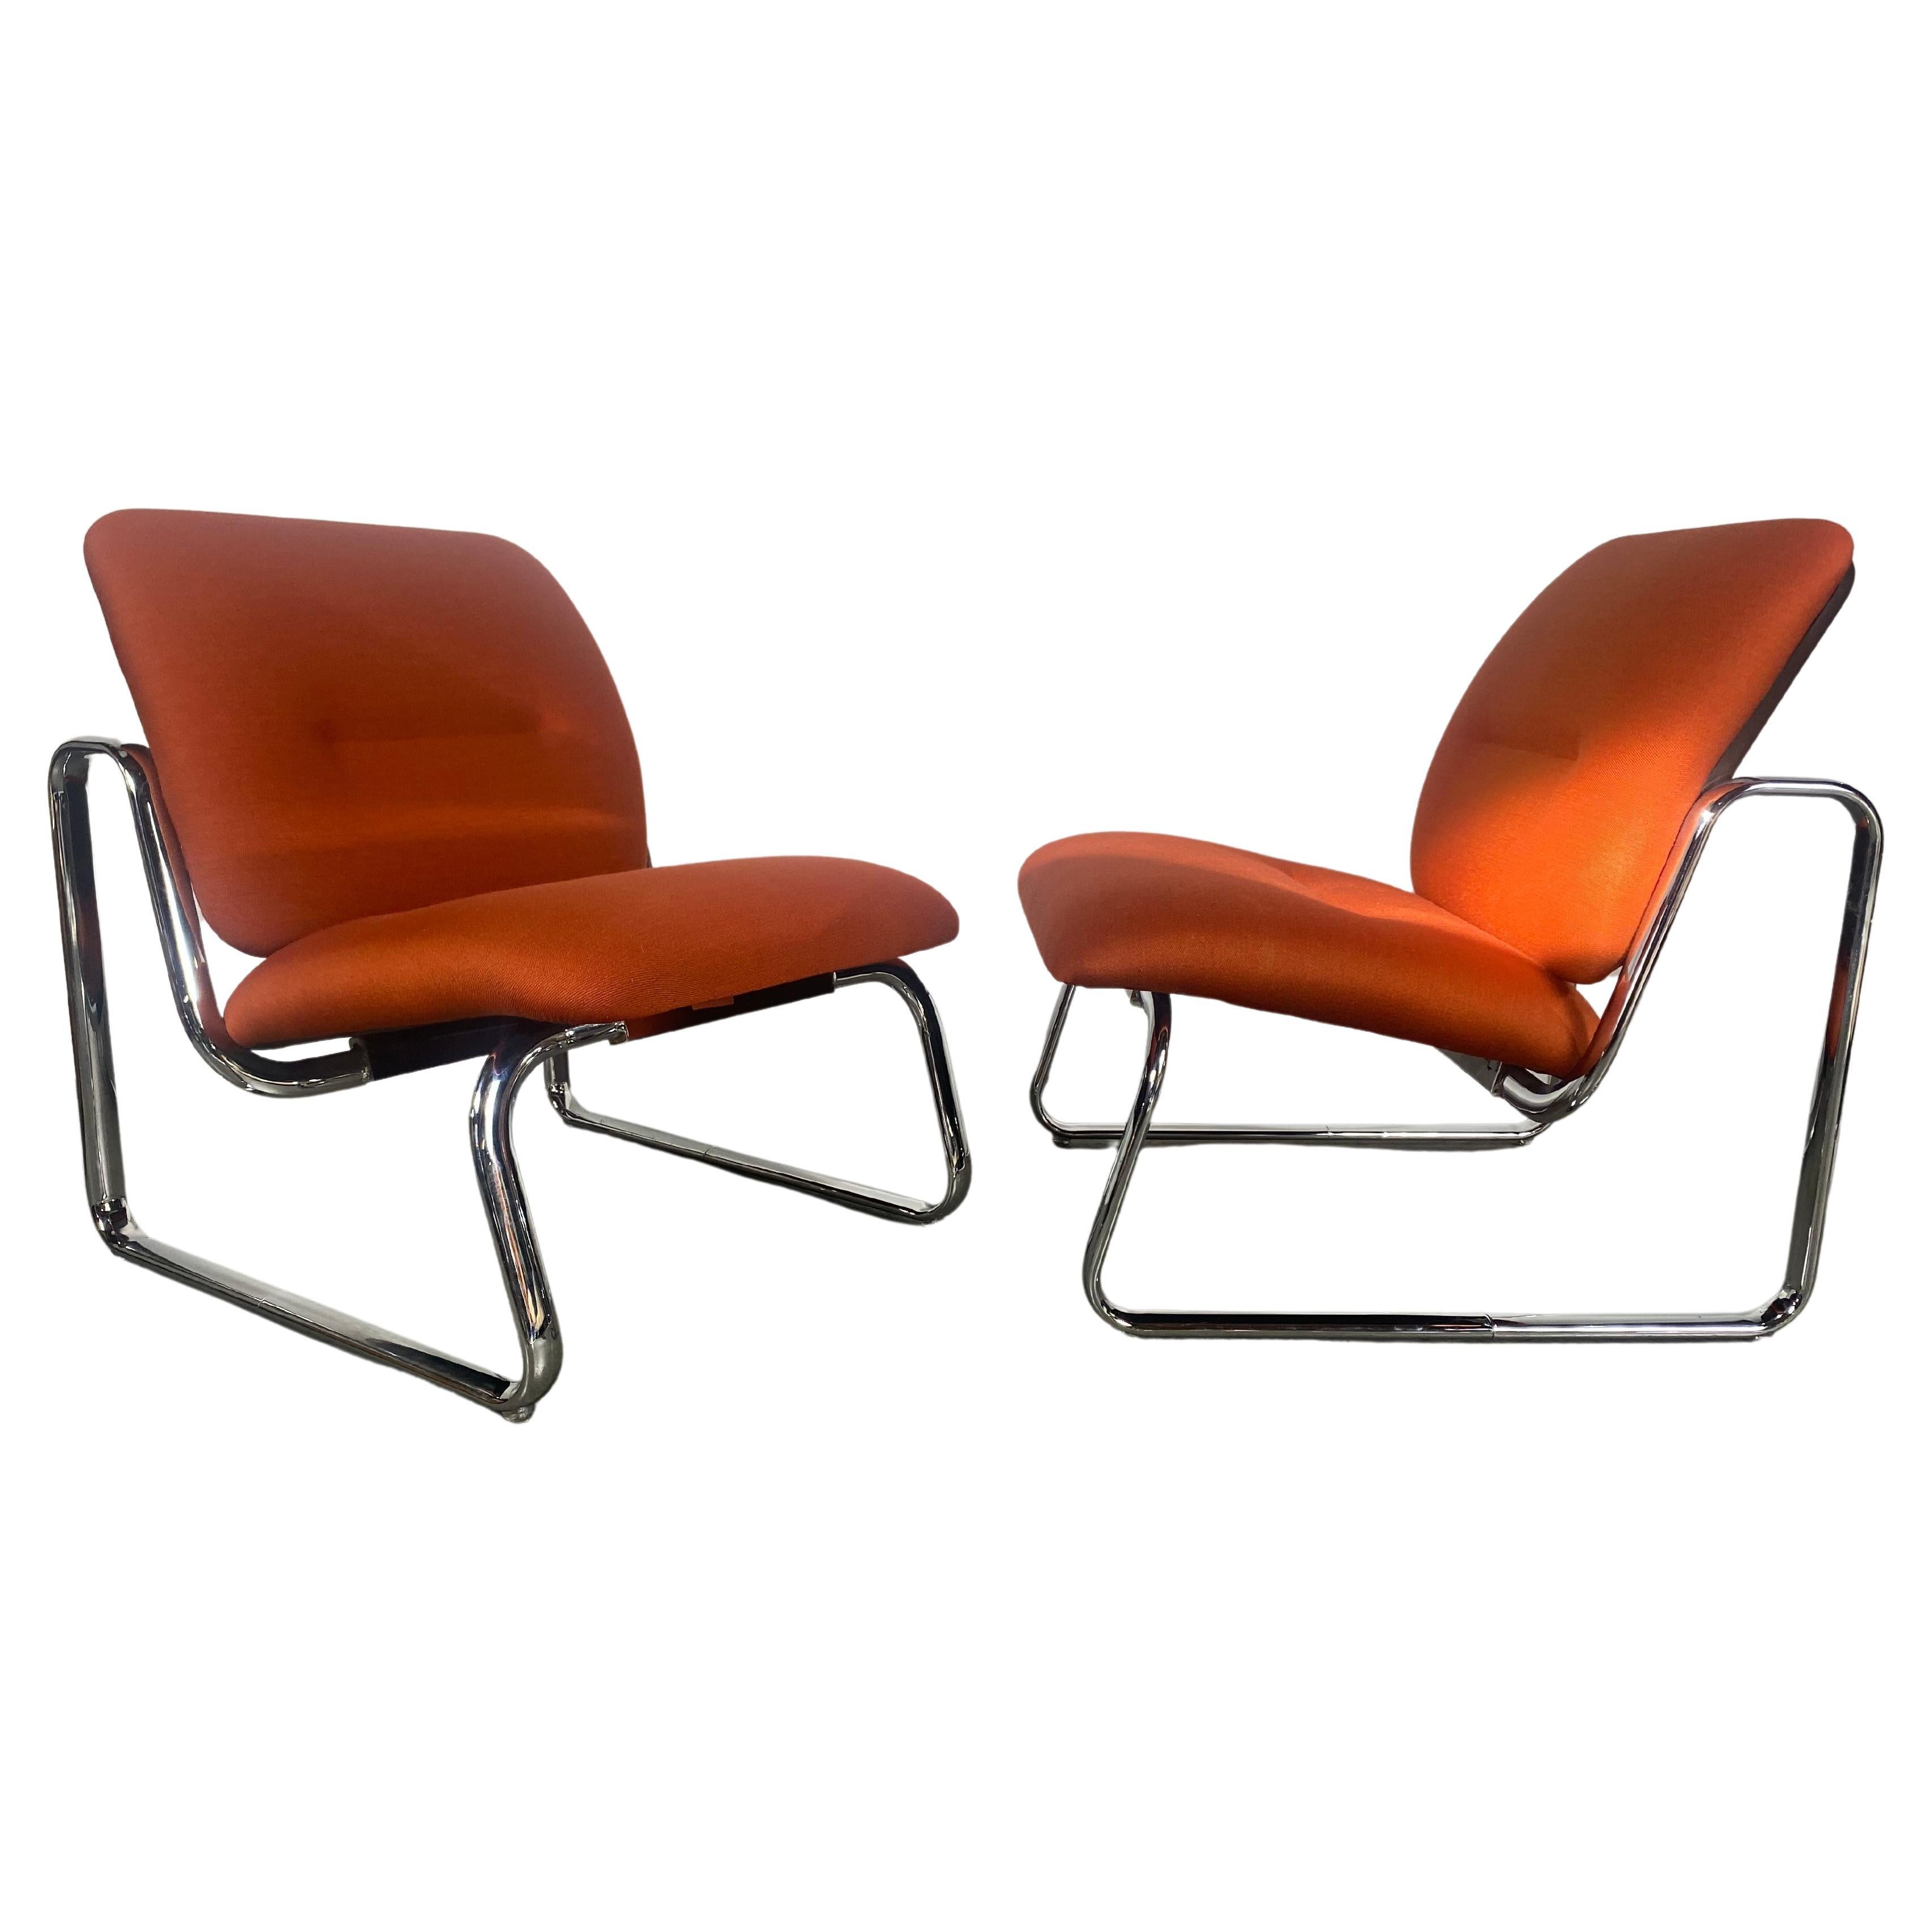 Matched Pair Space Age Modernist Lounge Chairs, Peter Protzmann/ Herman Miller For Sale